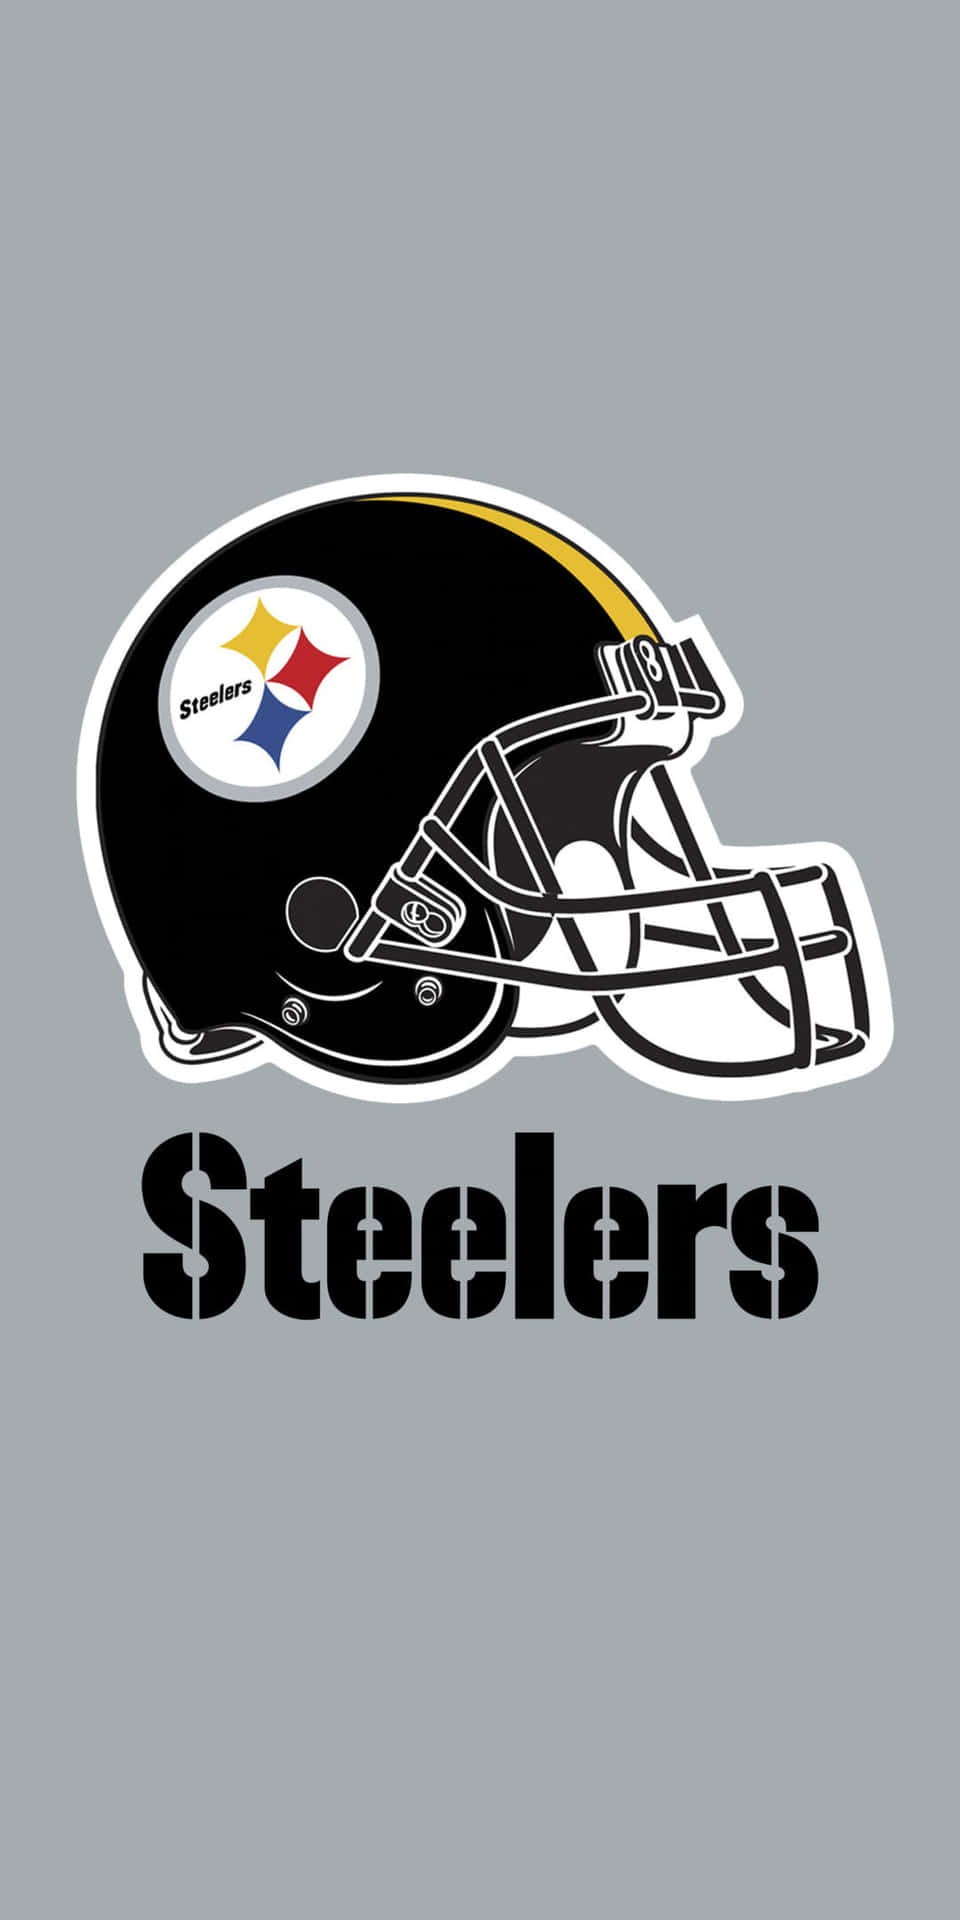 Get Ready For The Game With Your Favorite Steelers Phone Background